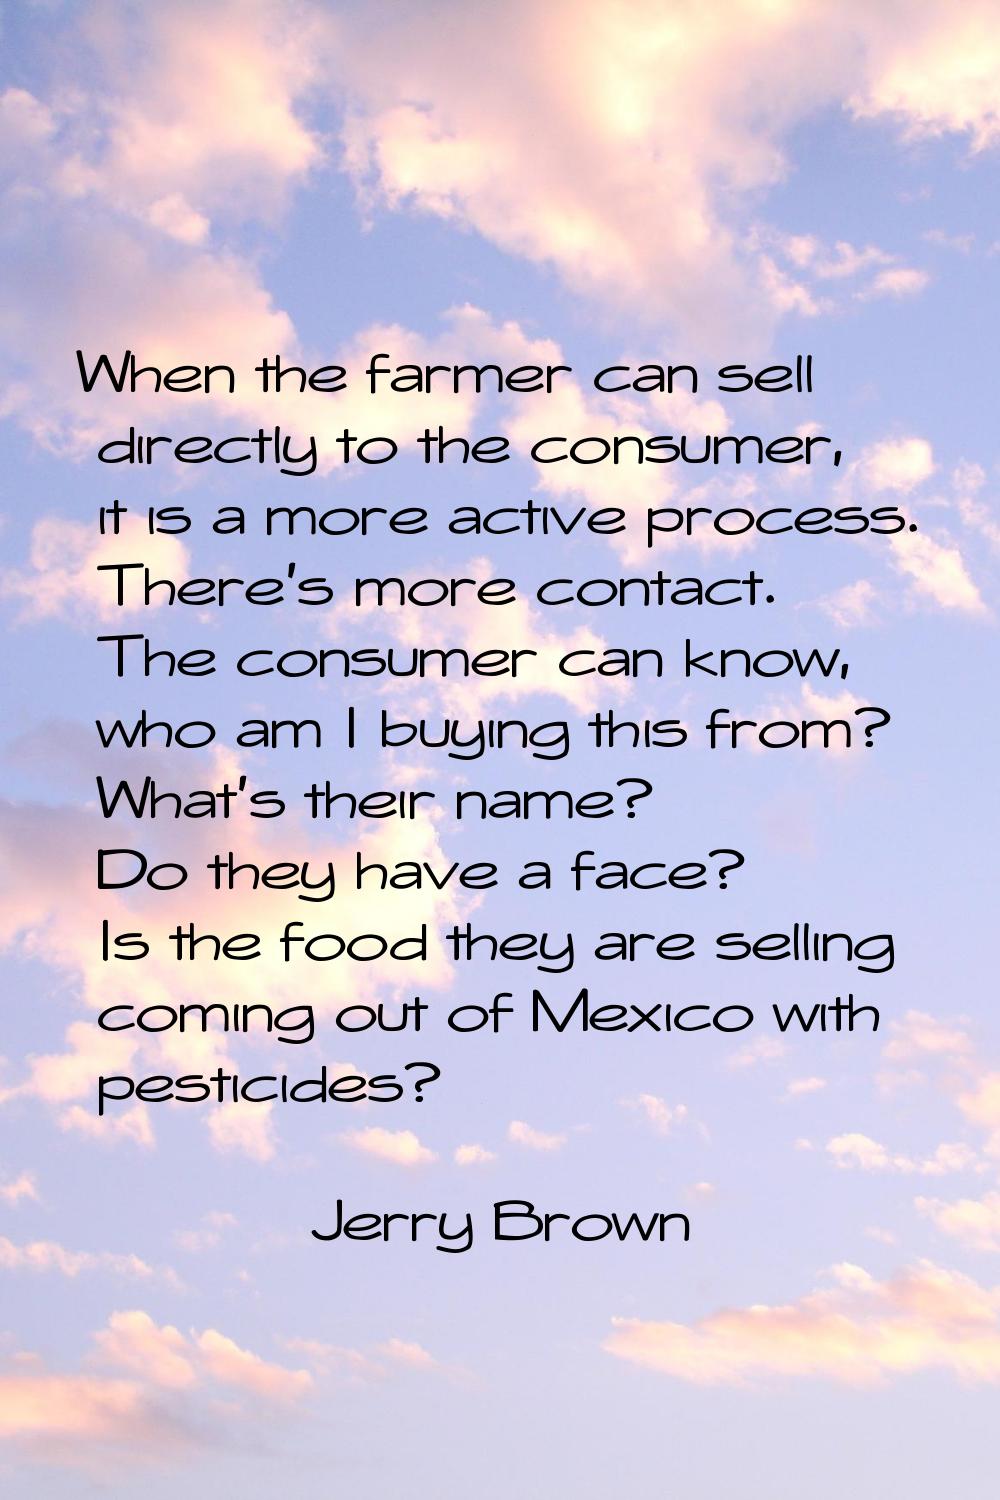 When the farmer can sell directly to the consumer, it is a more active process. There's more contac